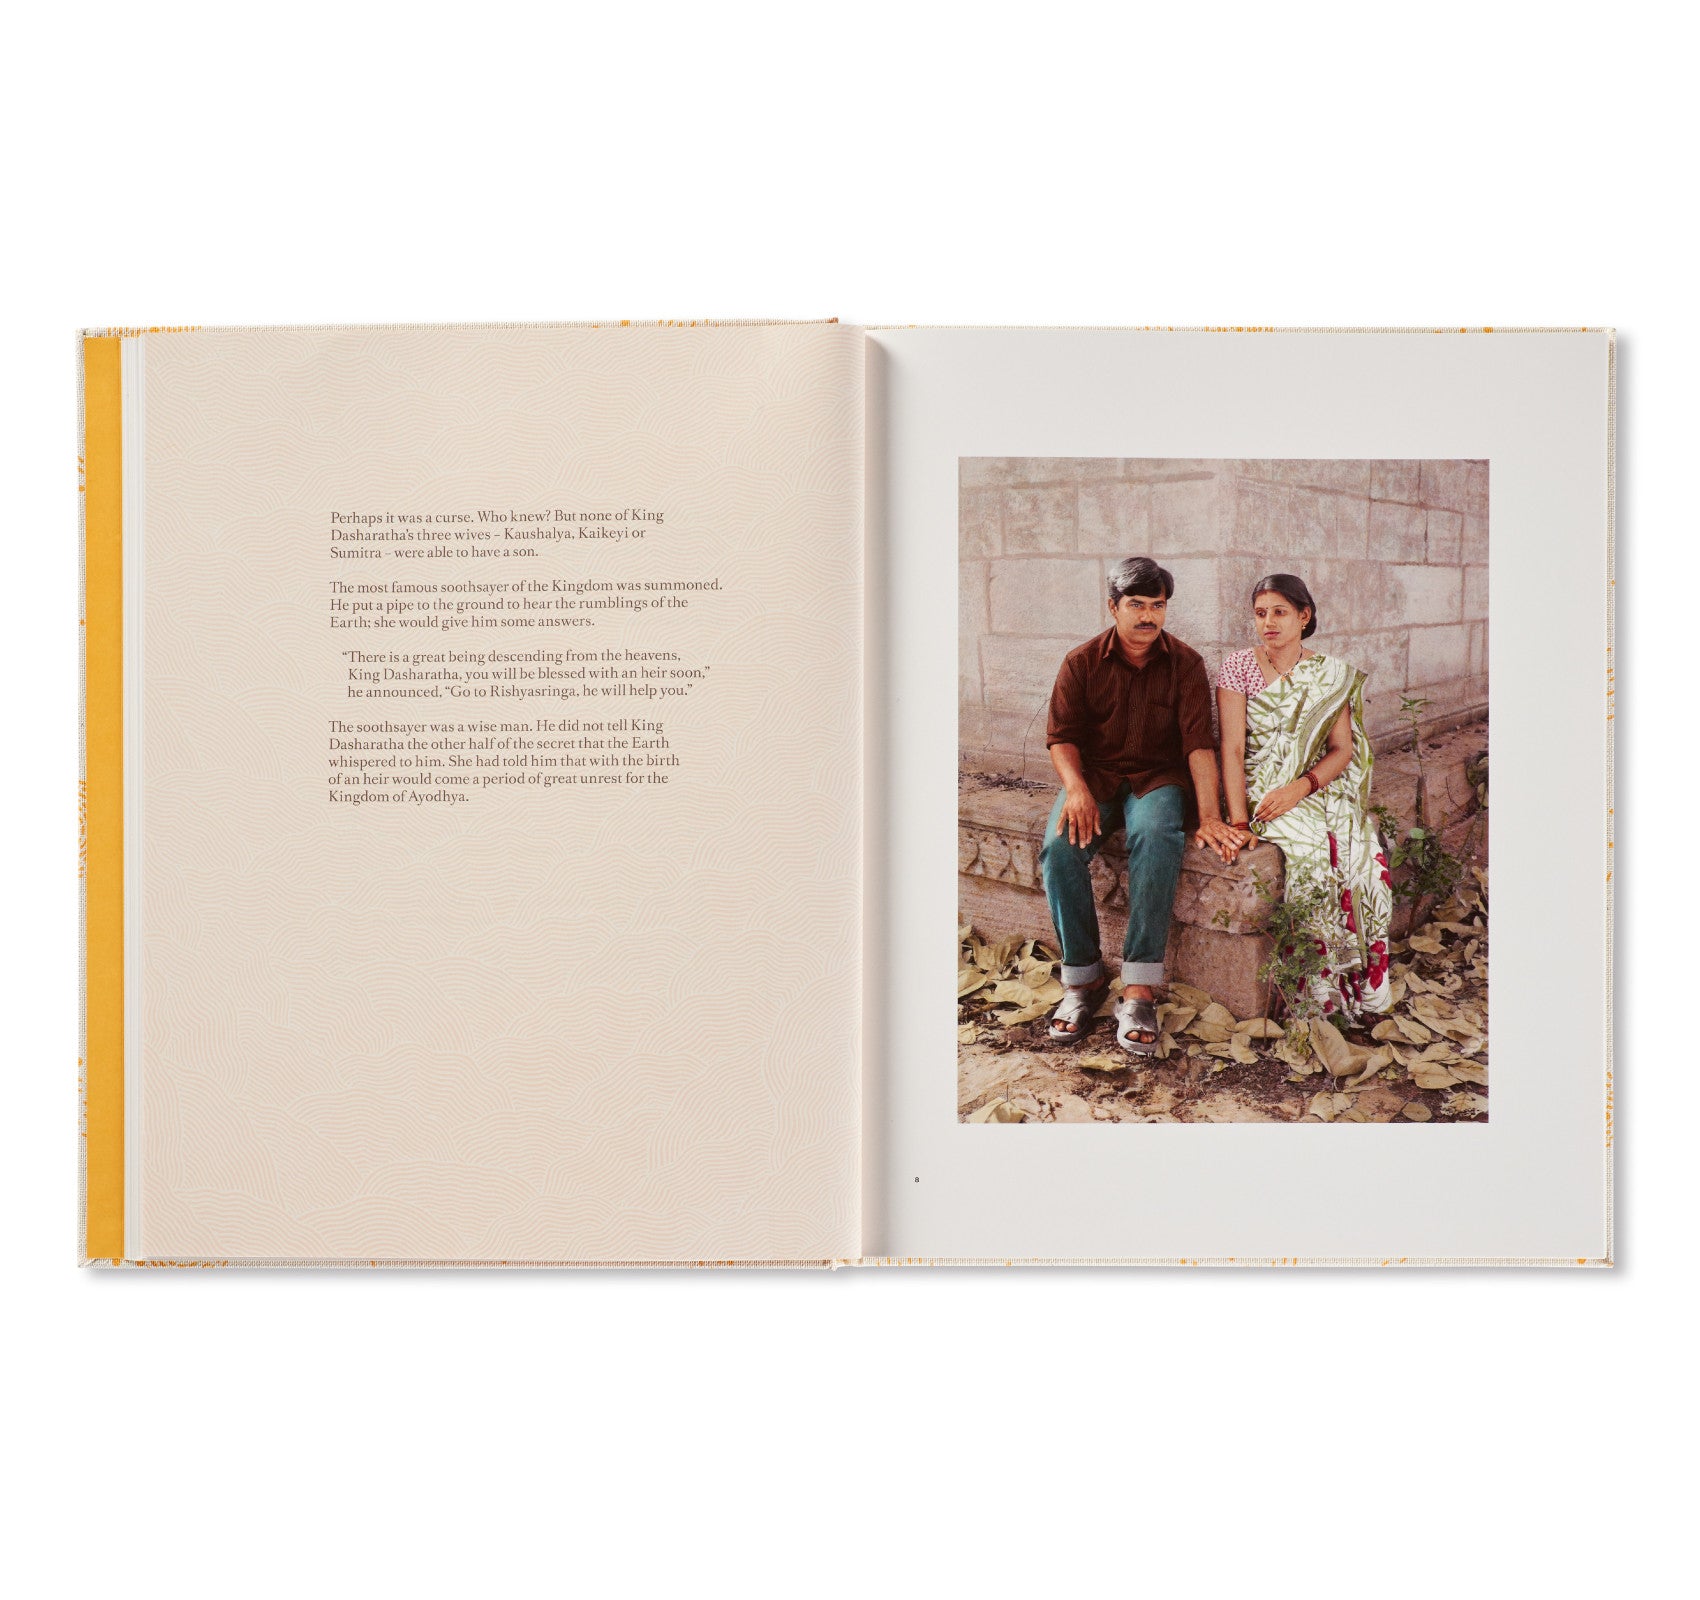 EARLY TIMES by Vasantha Yogananthan [SIGNED]